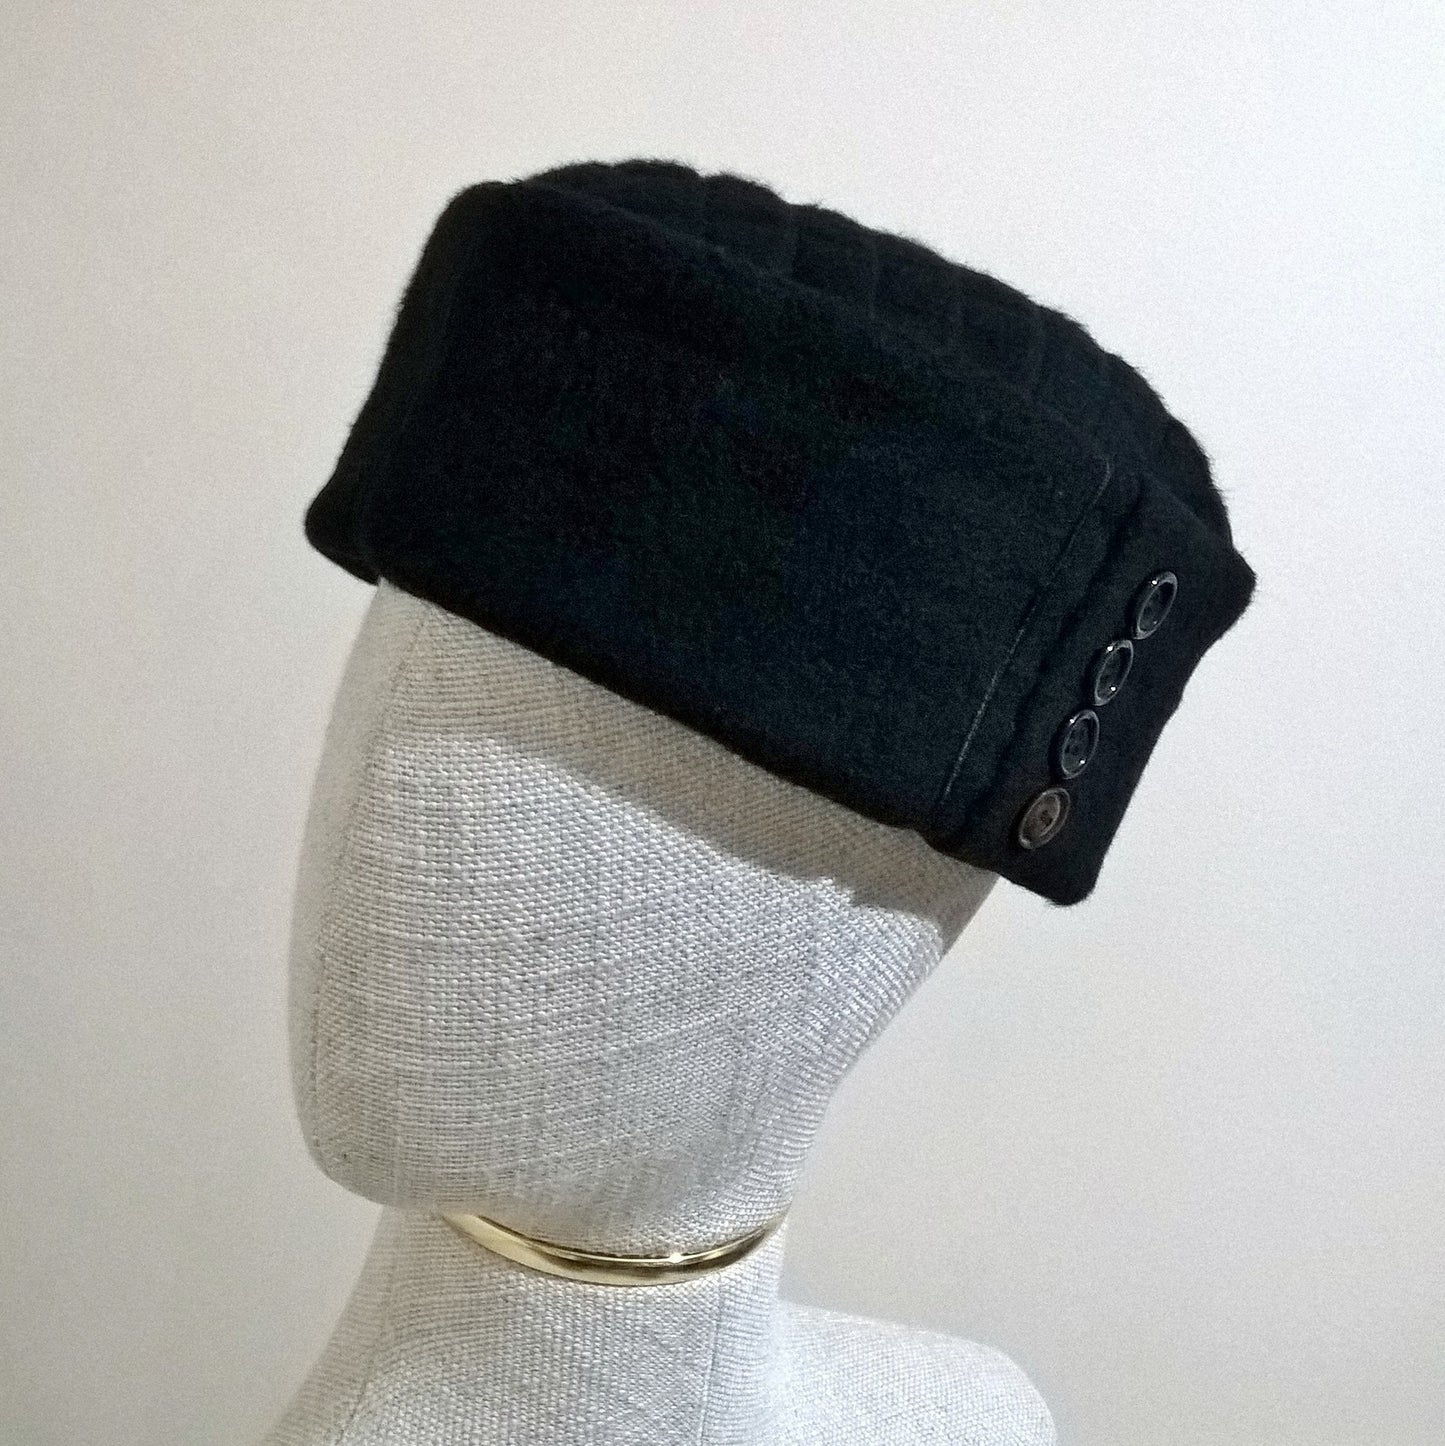 Black cashmere pillbox cap with button detail on crown